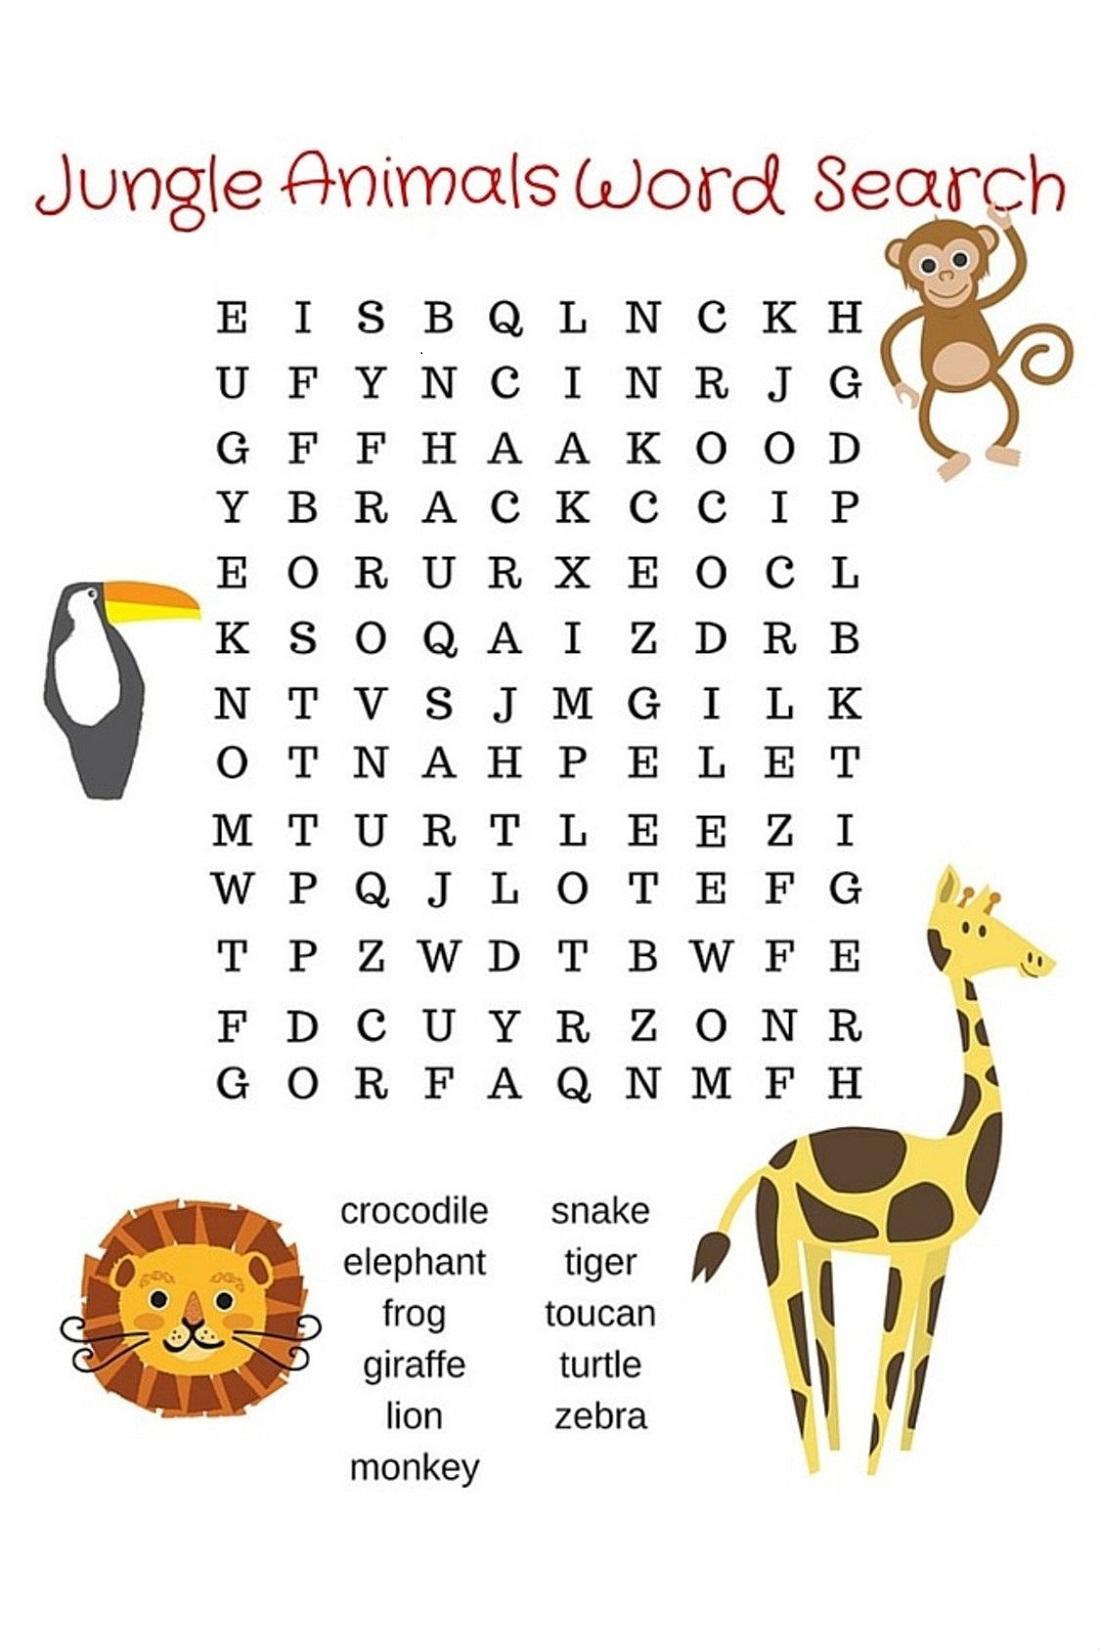 Animal Word Search for Children